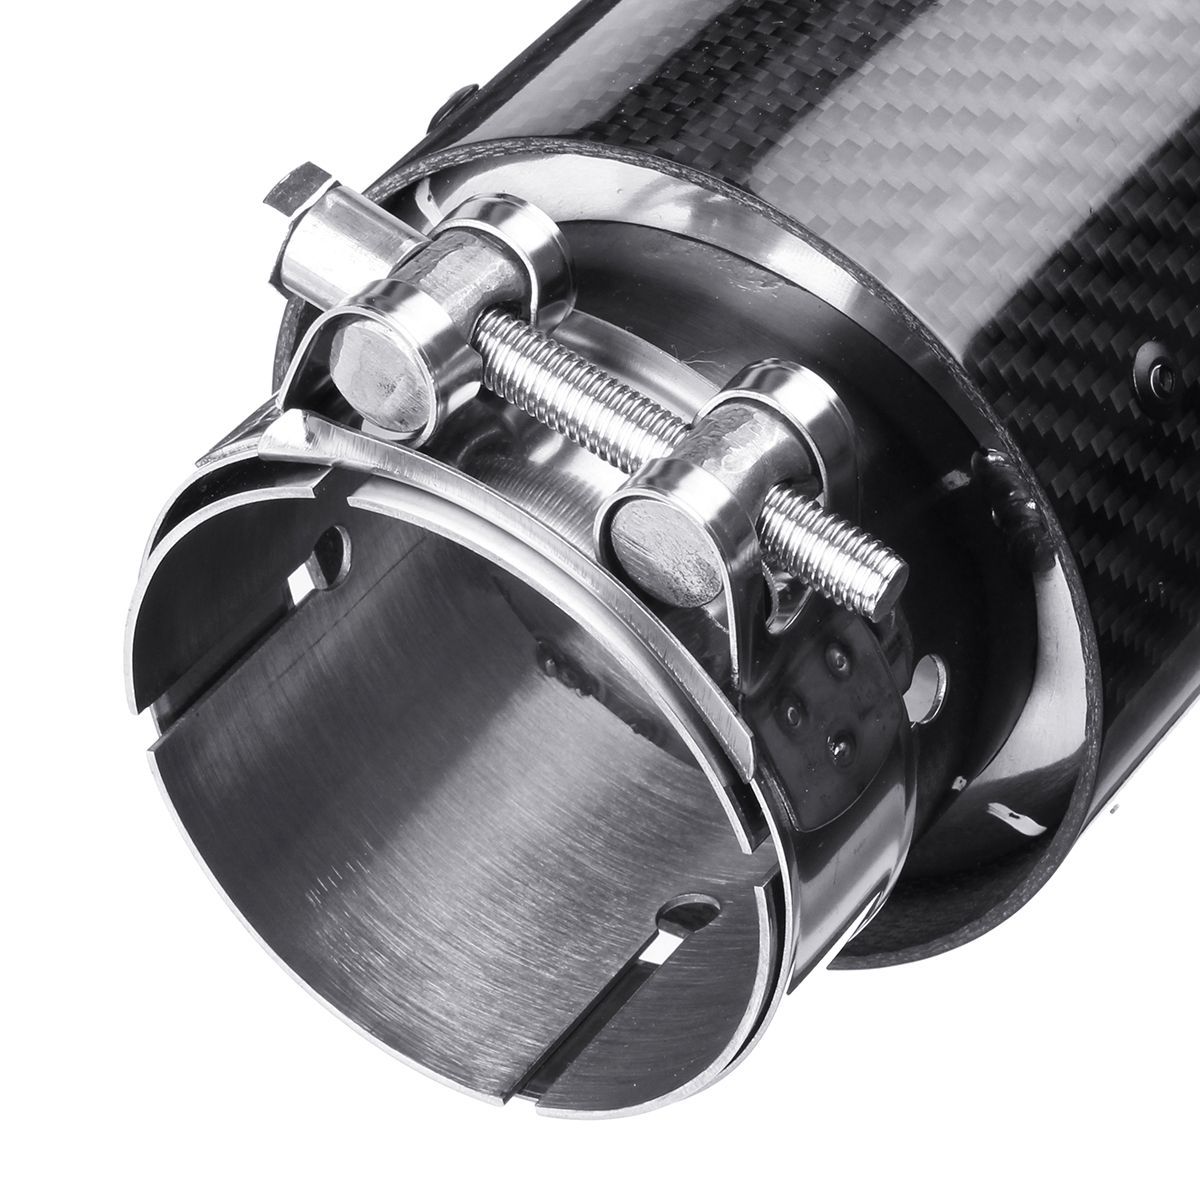 76MM-101MM-Outlet-Car-Carbon-Fiber-Stainless-Steel-Car-Rear-Exhaust-Tip-Pipe-Muffler-Adapter-Reducer-1681982